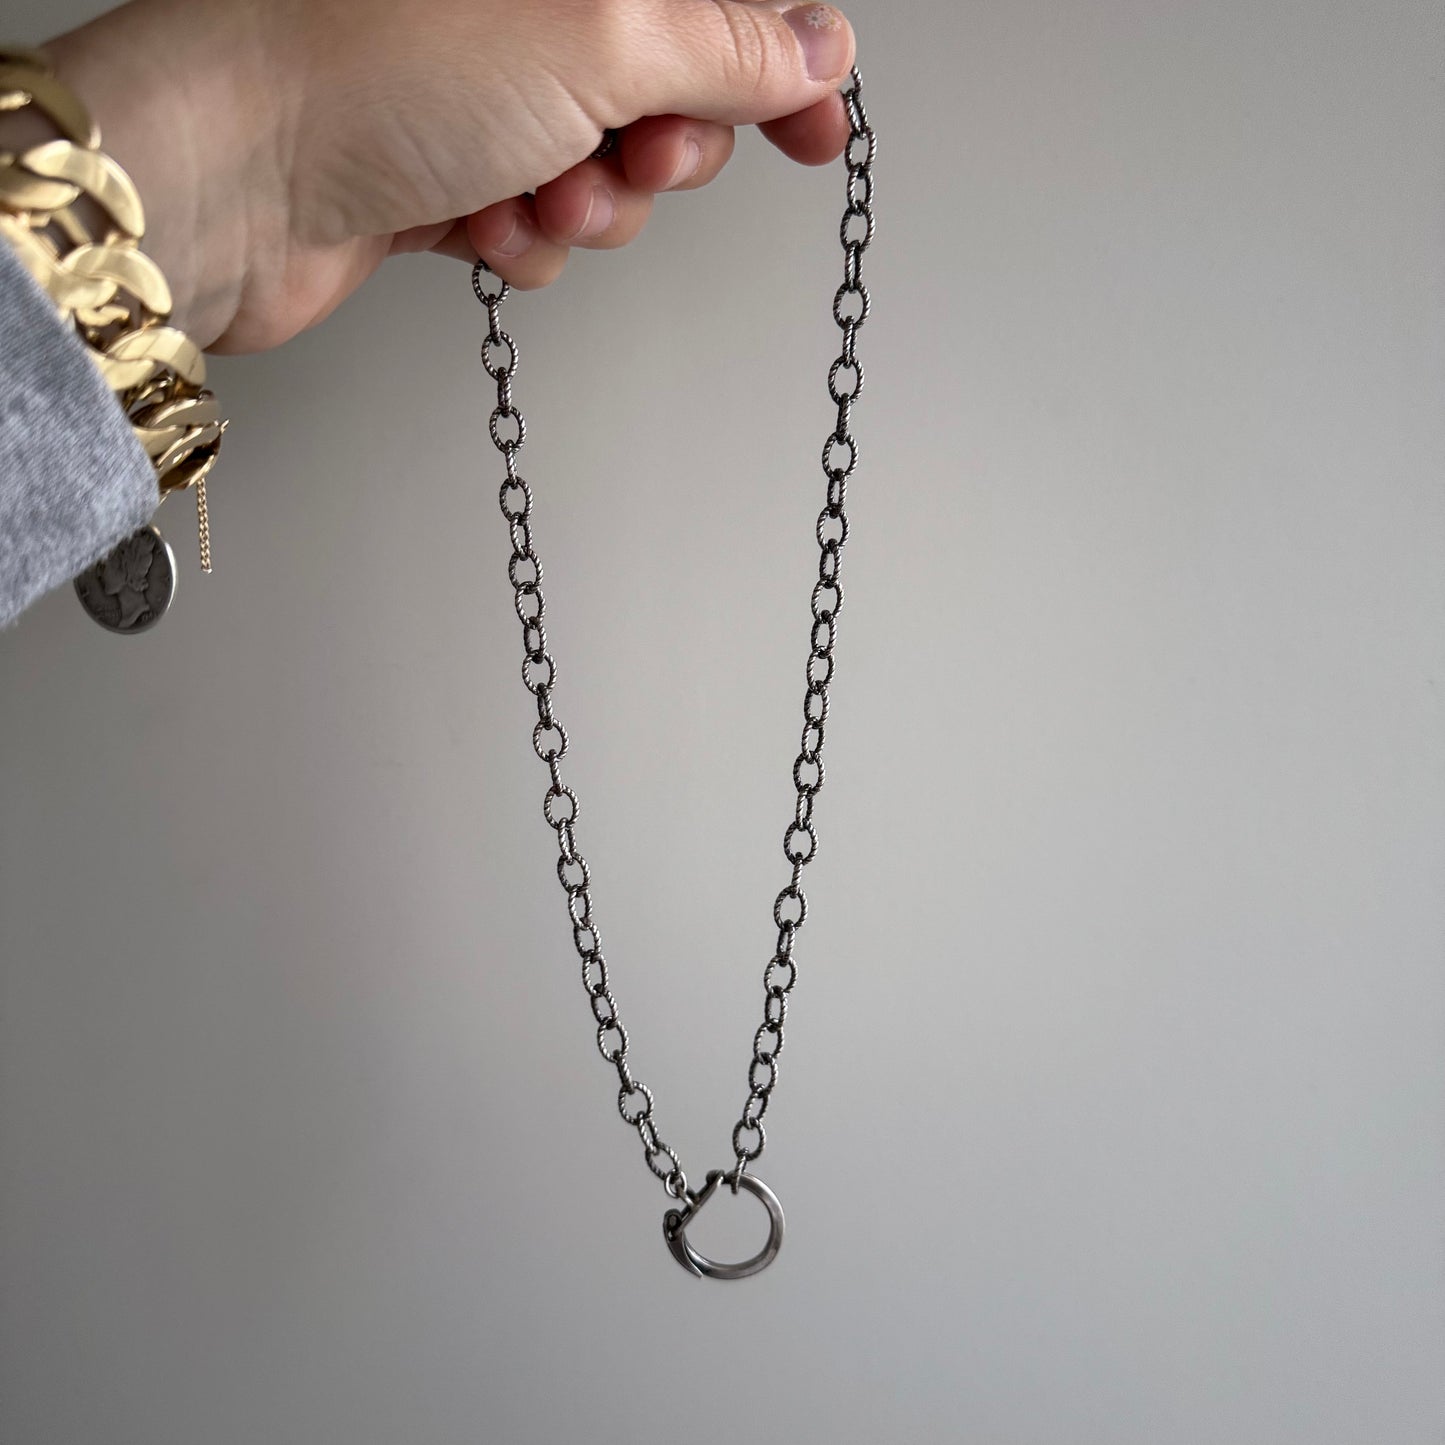 reimagined V I N T A G E // twisted links / sterling silver cable link necklace with charm holder clasp / 18.25", 20g